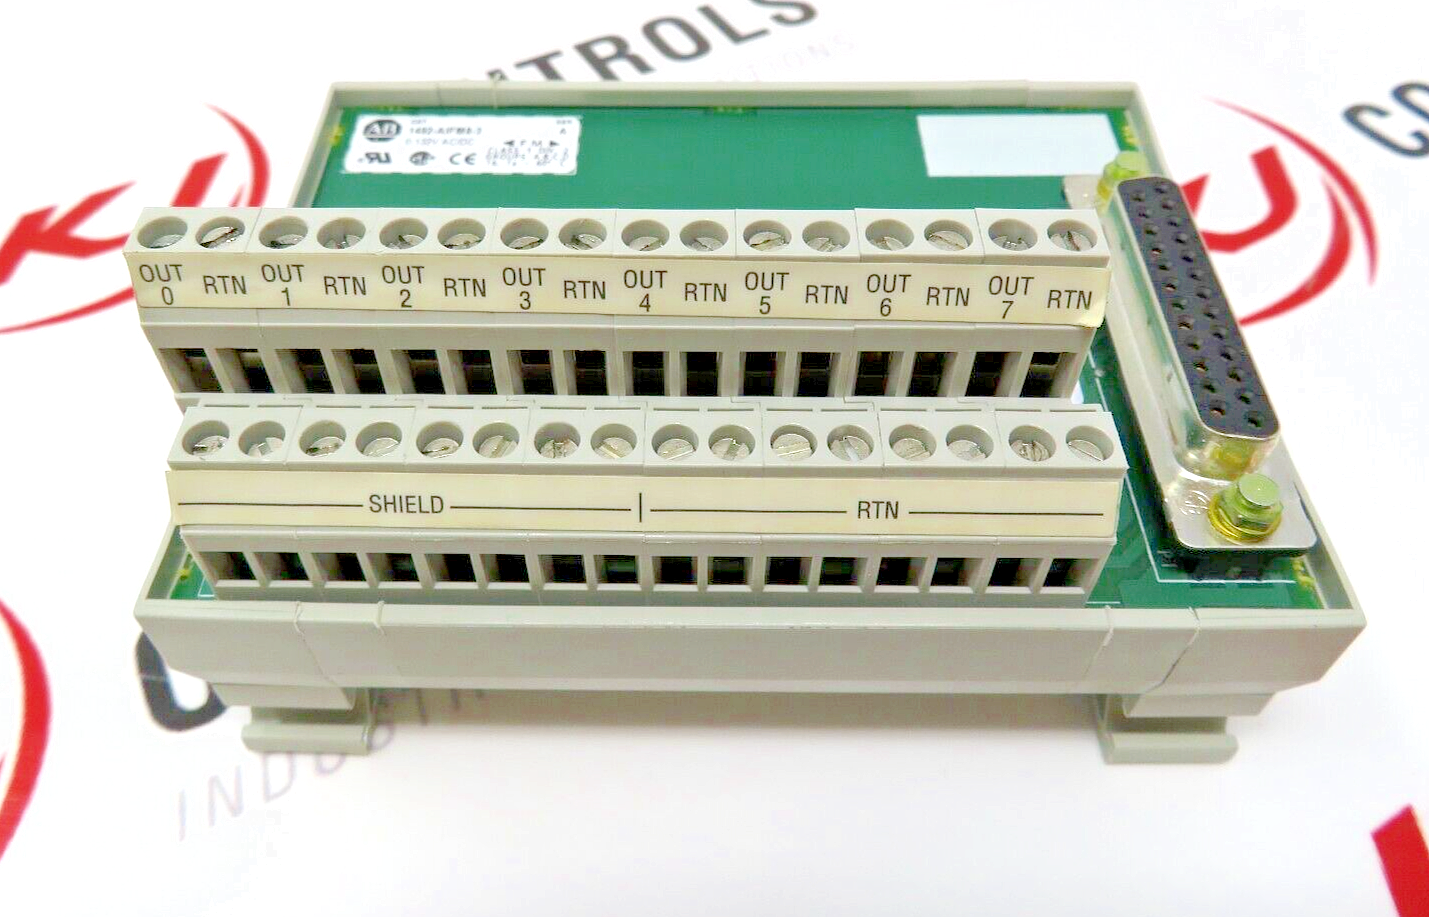 Allen-Bradley 1492-AIFM8-3 Analog Interface Module With Fixed Terminal Block